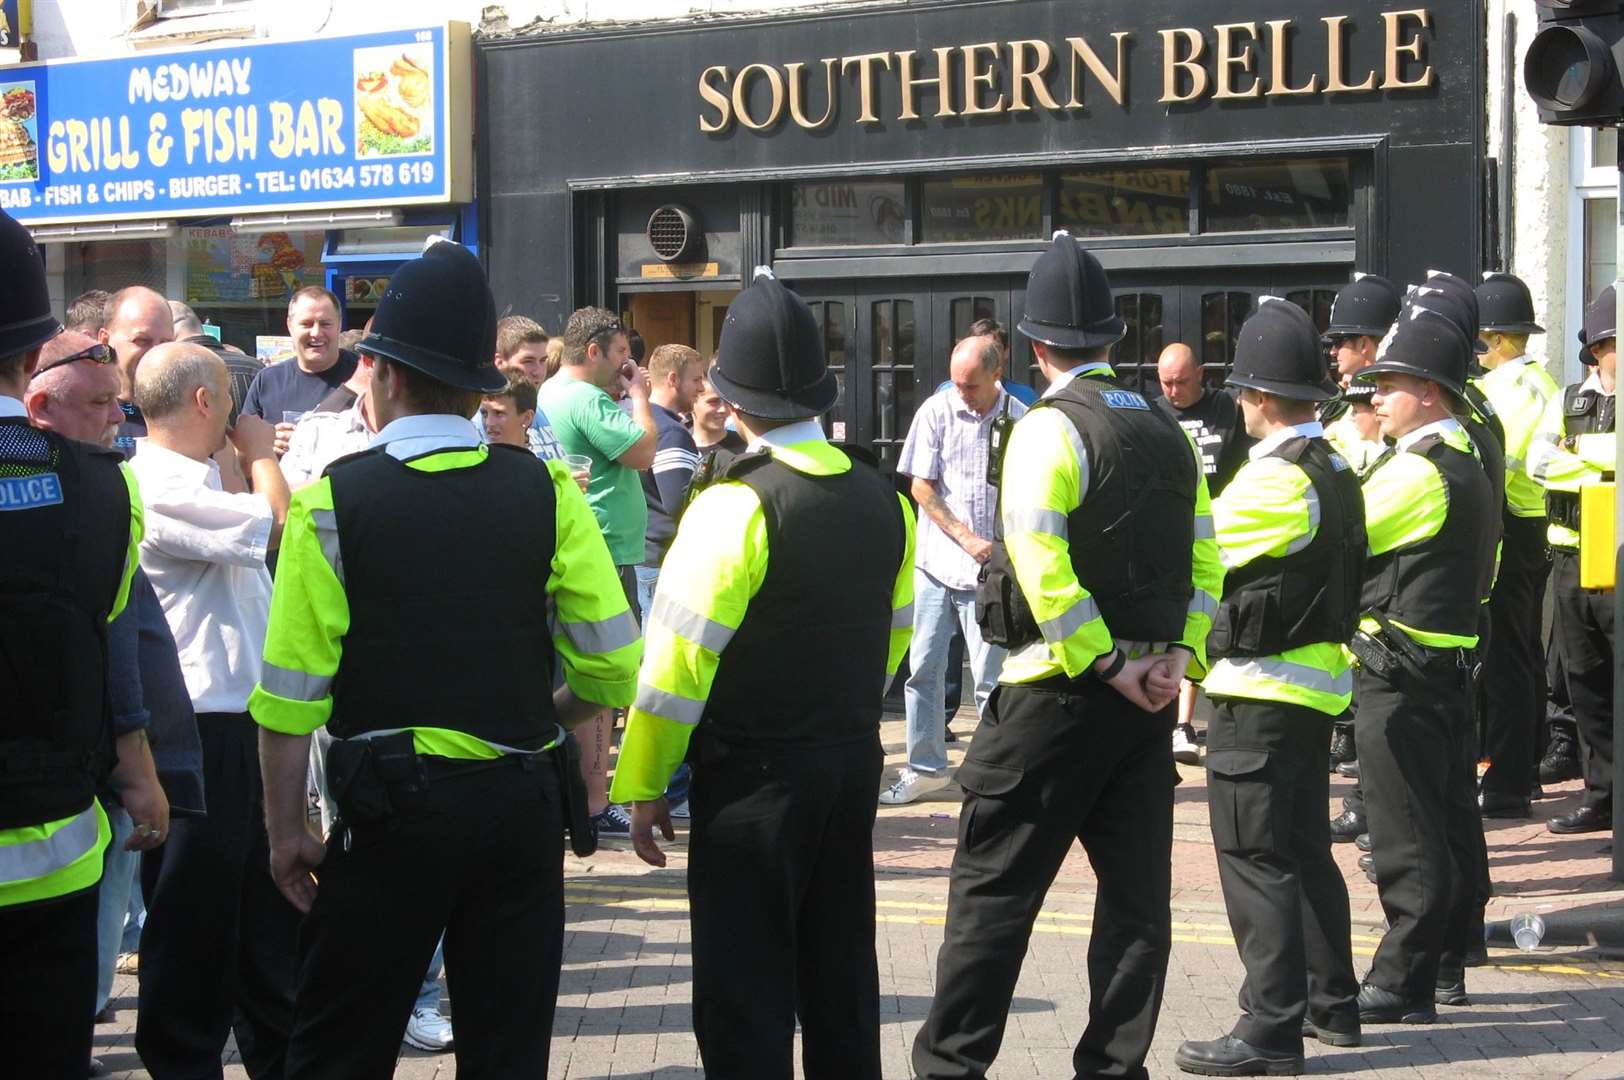 Gillingham and Swindon fans kept apart by Police during a meeting between the sides in 2009 Picture: Jenni Horn